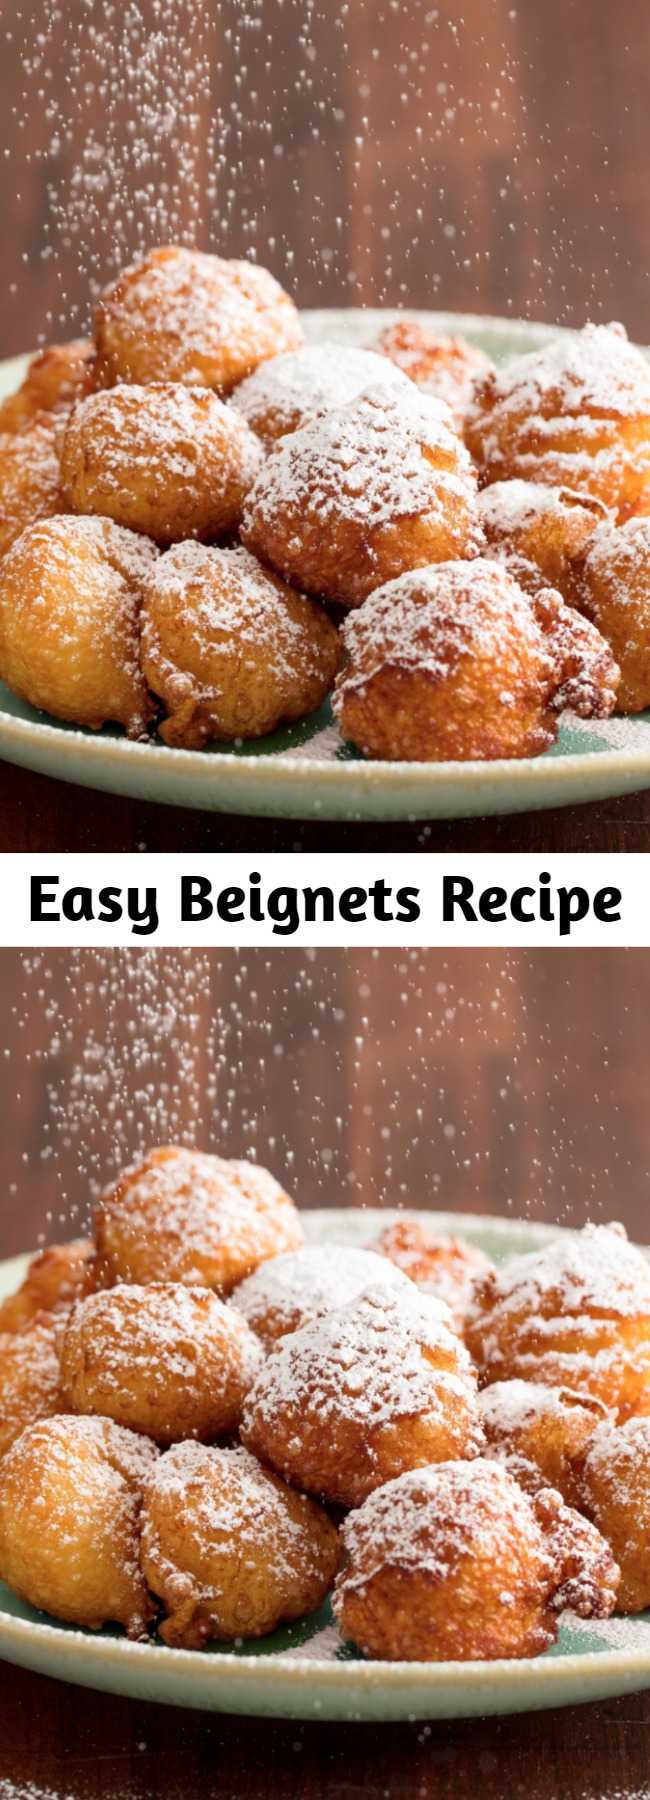 Easy Beignets Recipe - You've probably heard of beignets before because of the long lines that they draw in New Orleans. The pillow-like fried treats covered in powdered sugar are worth the trip to New Orleans alone. This easy recipe let's you skip the lines and have them at home. They have a simple batter that fries up in just a few minutes. What could be better? #easy #recipe #beignets #neworleans #cafedumonde #fry #vanilla #fried